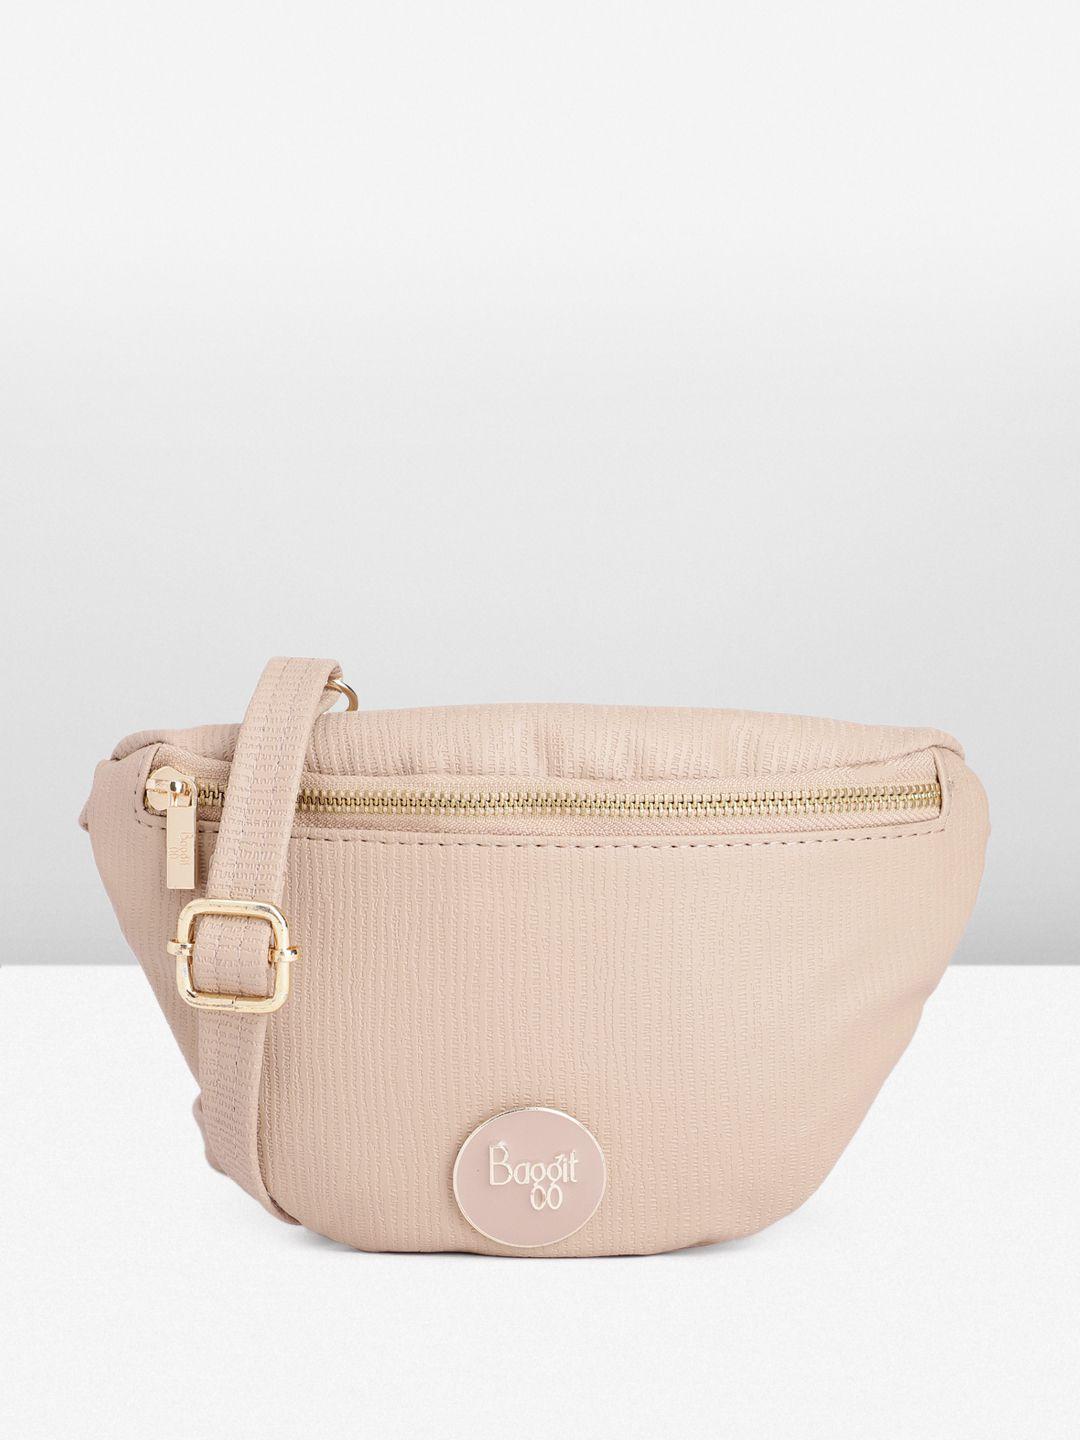 baggit textured structured sling bag with brand logo buckle detail